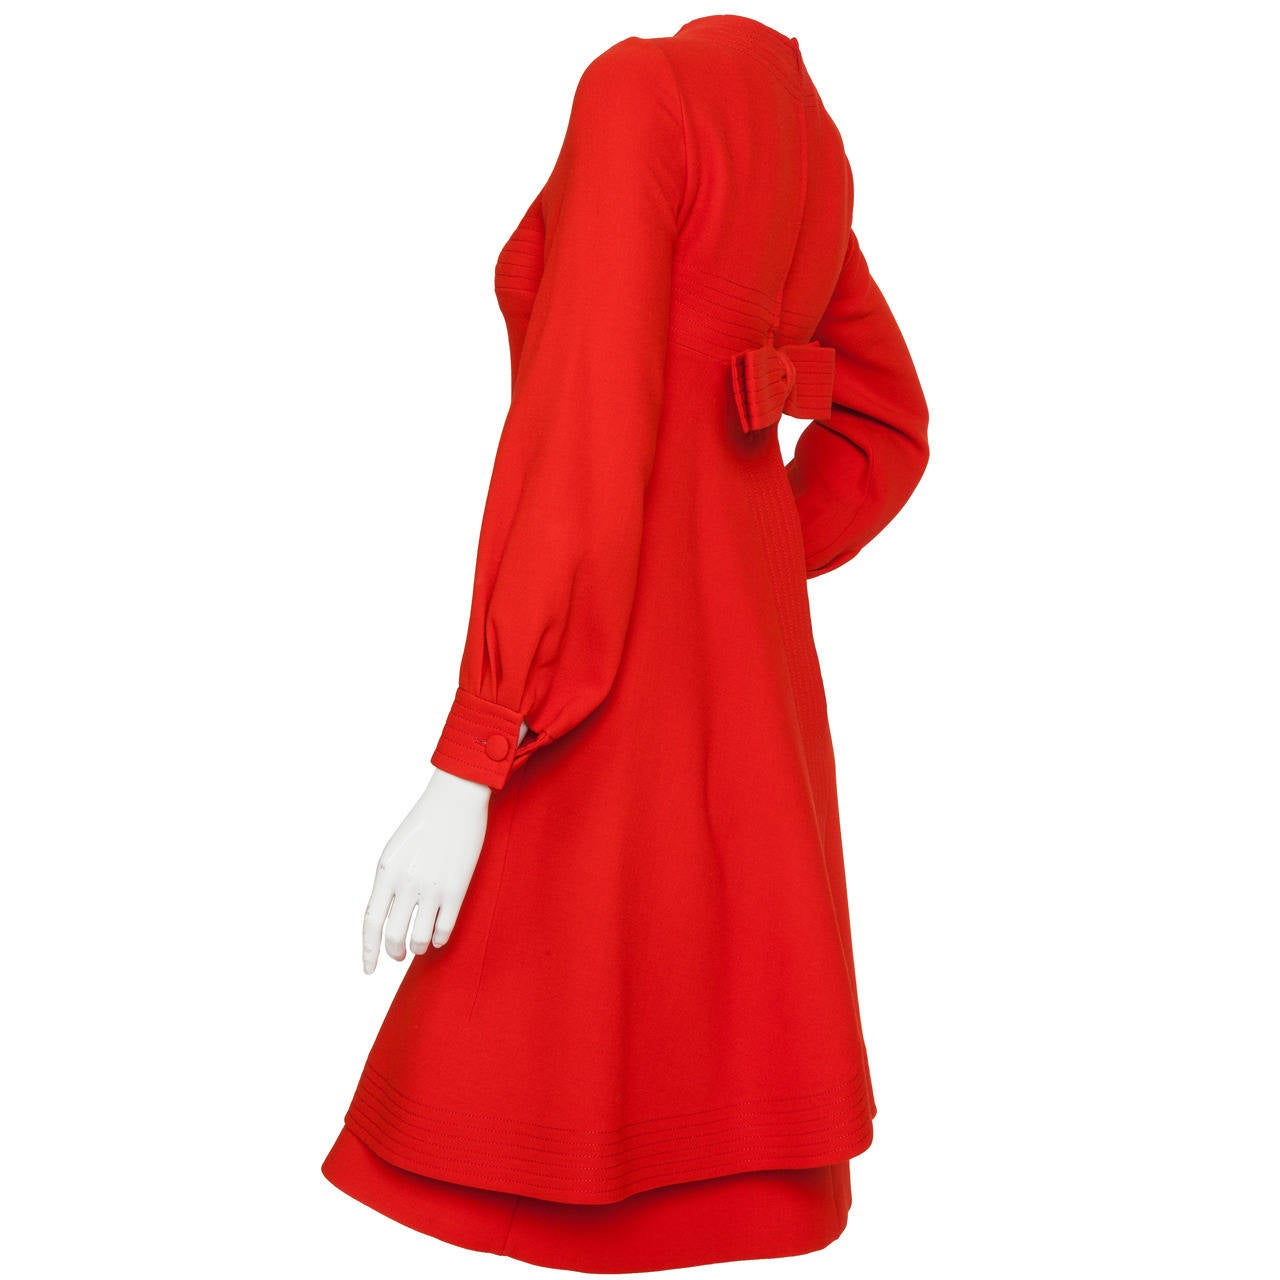 A circa 1970 Pierre Cardin long-sleeved tomato red wool dress with channel stitched design motif. The A-line overdress features an eight-inch center front slit just above the hem, decorative frontal faux slat pockets and channel stitching at the